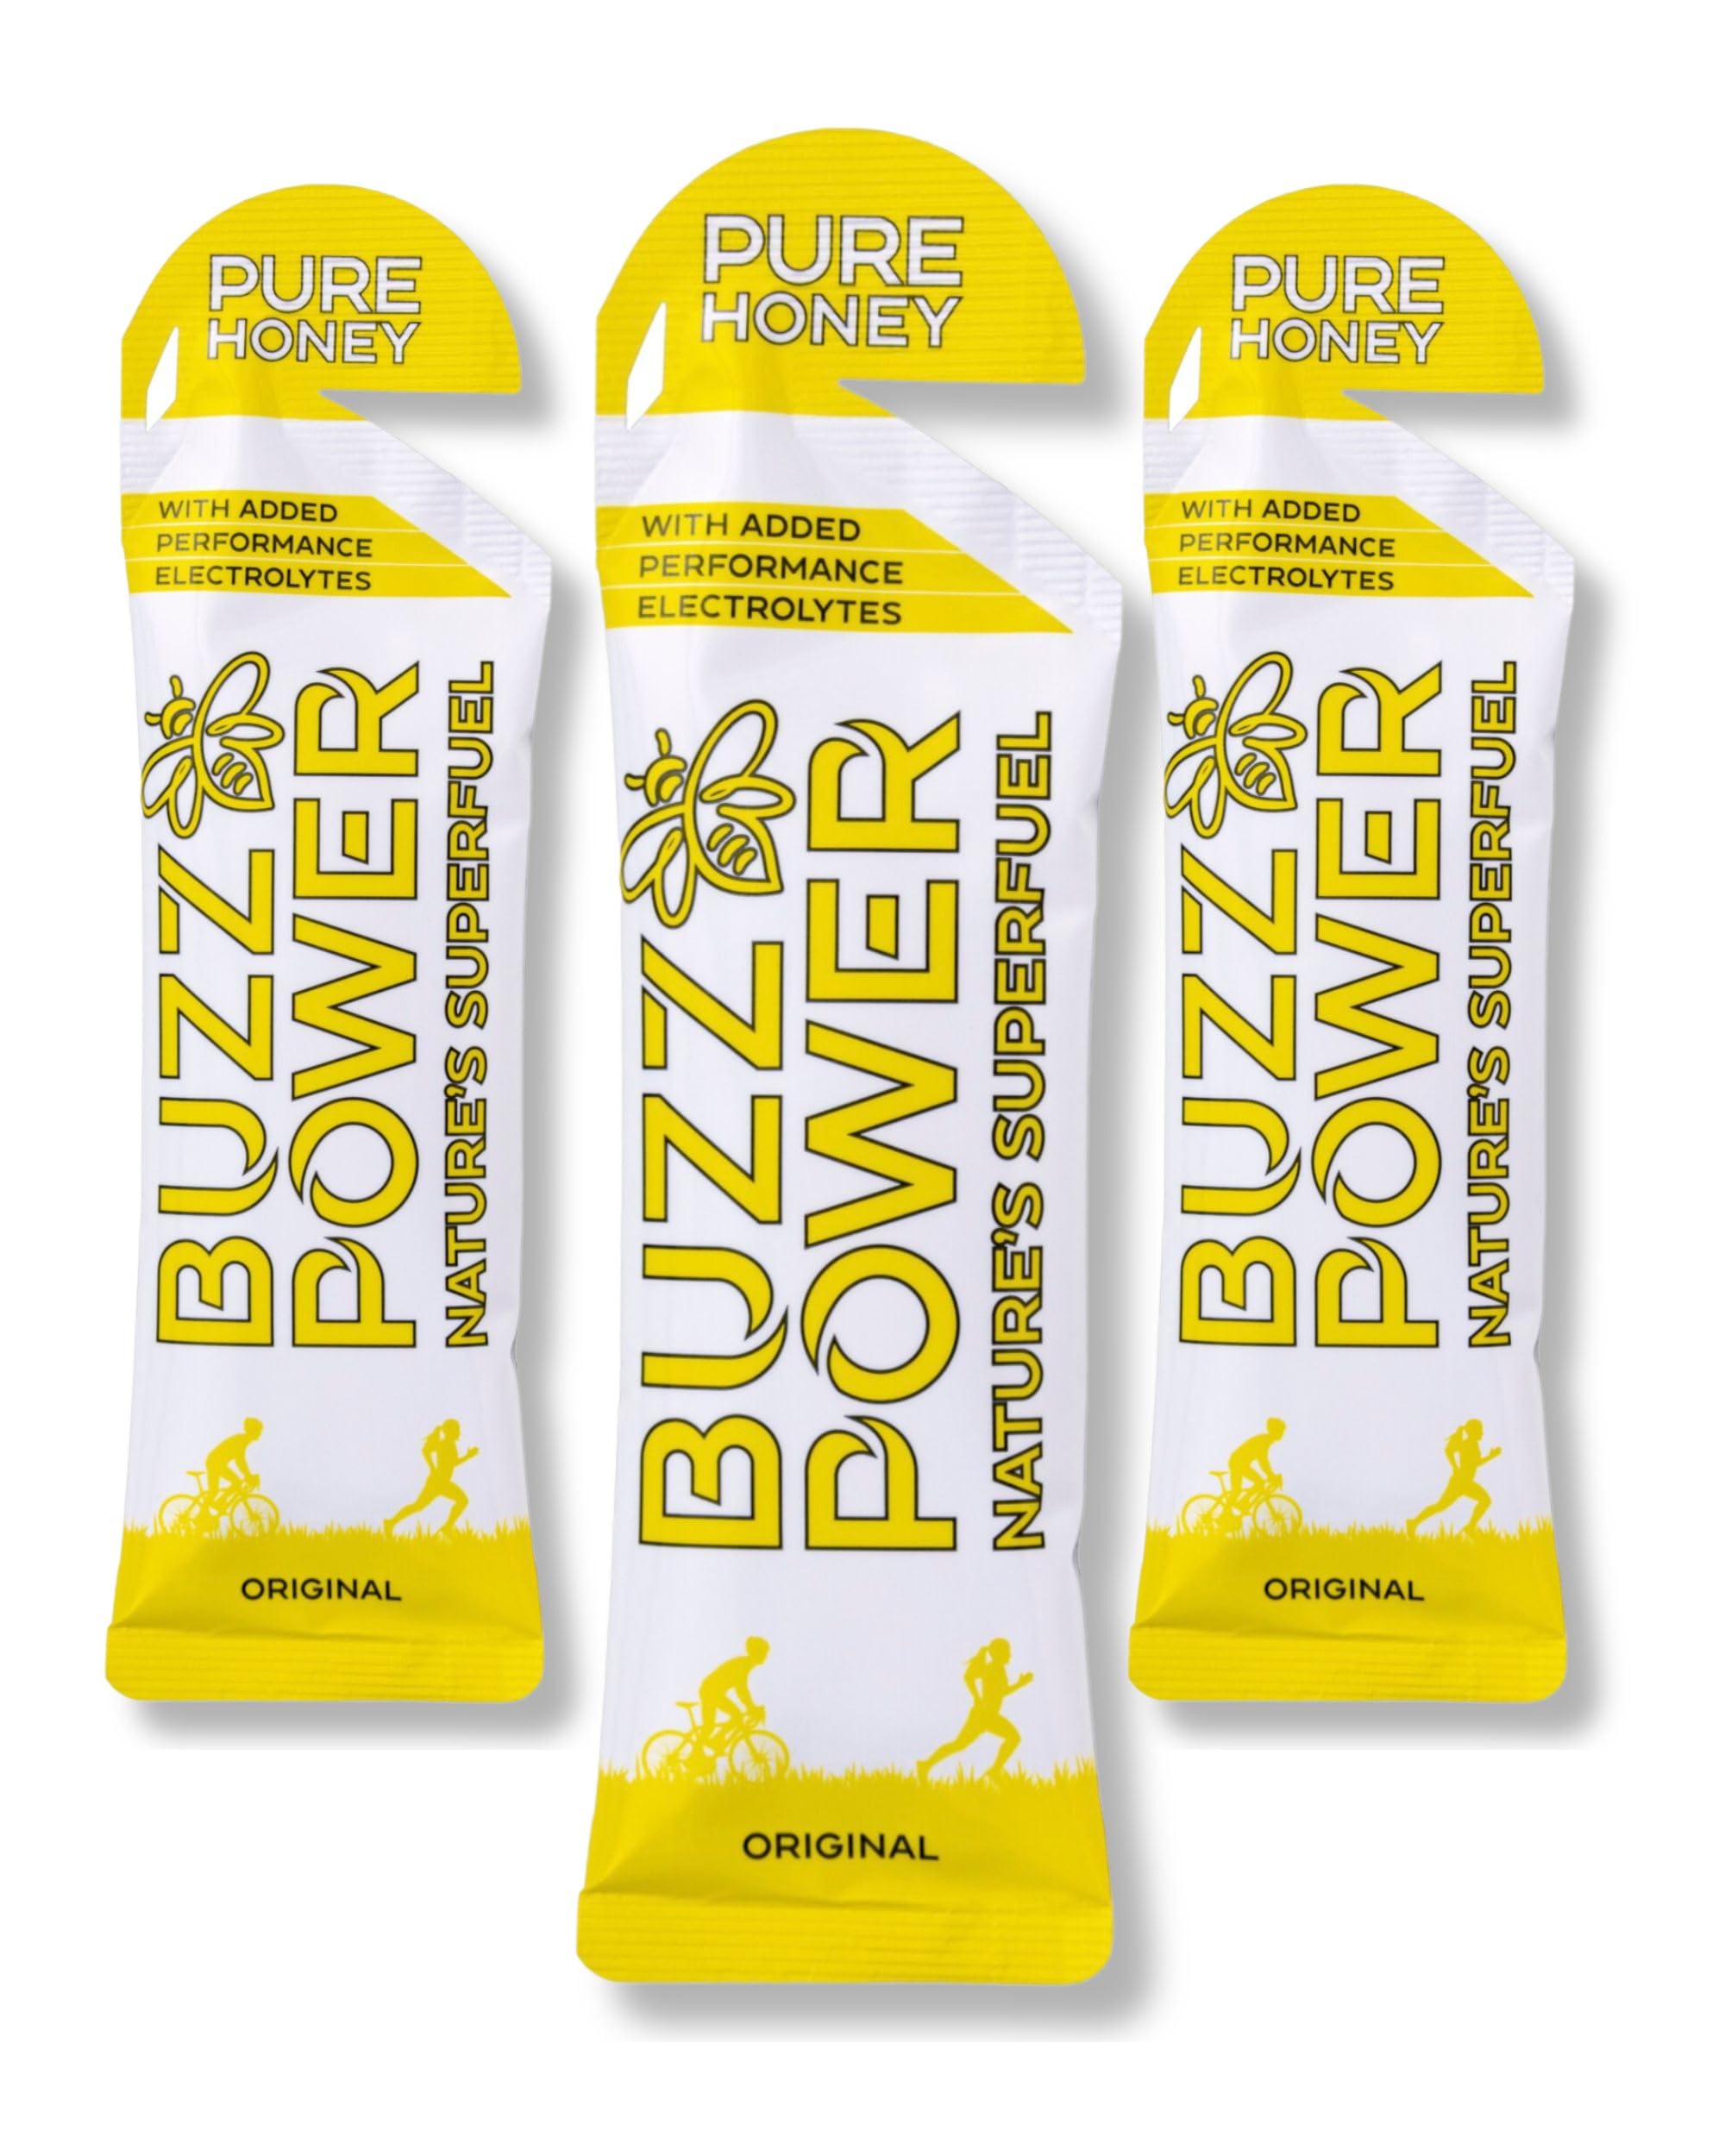 Buzz Power Natural Energy Gel, 25 g Glucose & Fructose Carbohydrate from  Pure Organic Honey with Sports Electrolytes